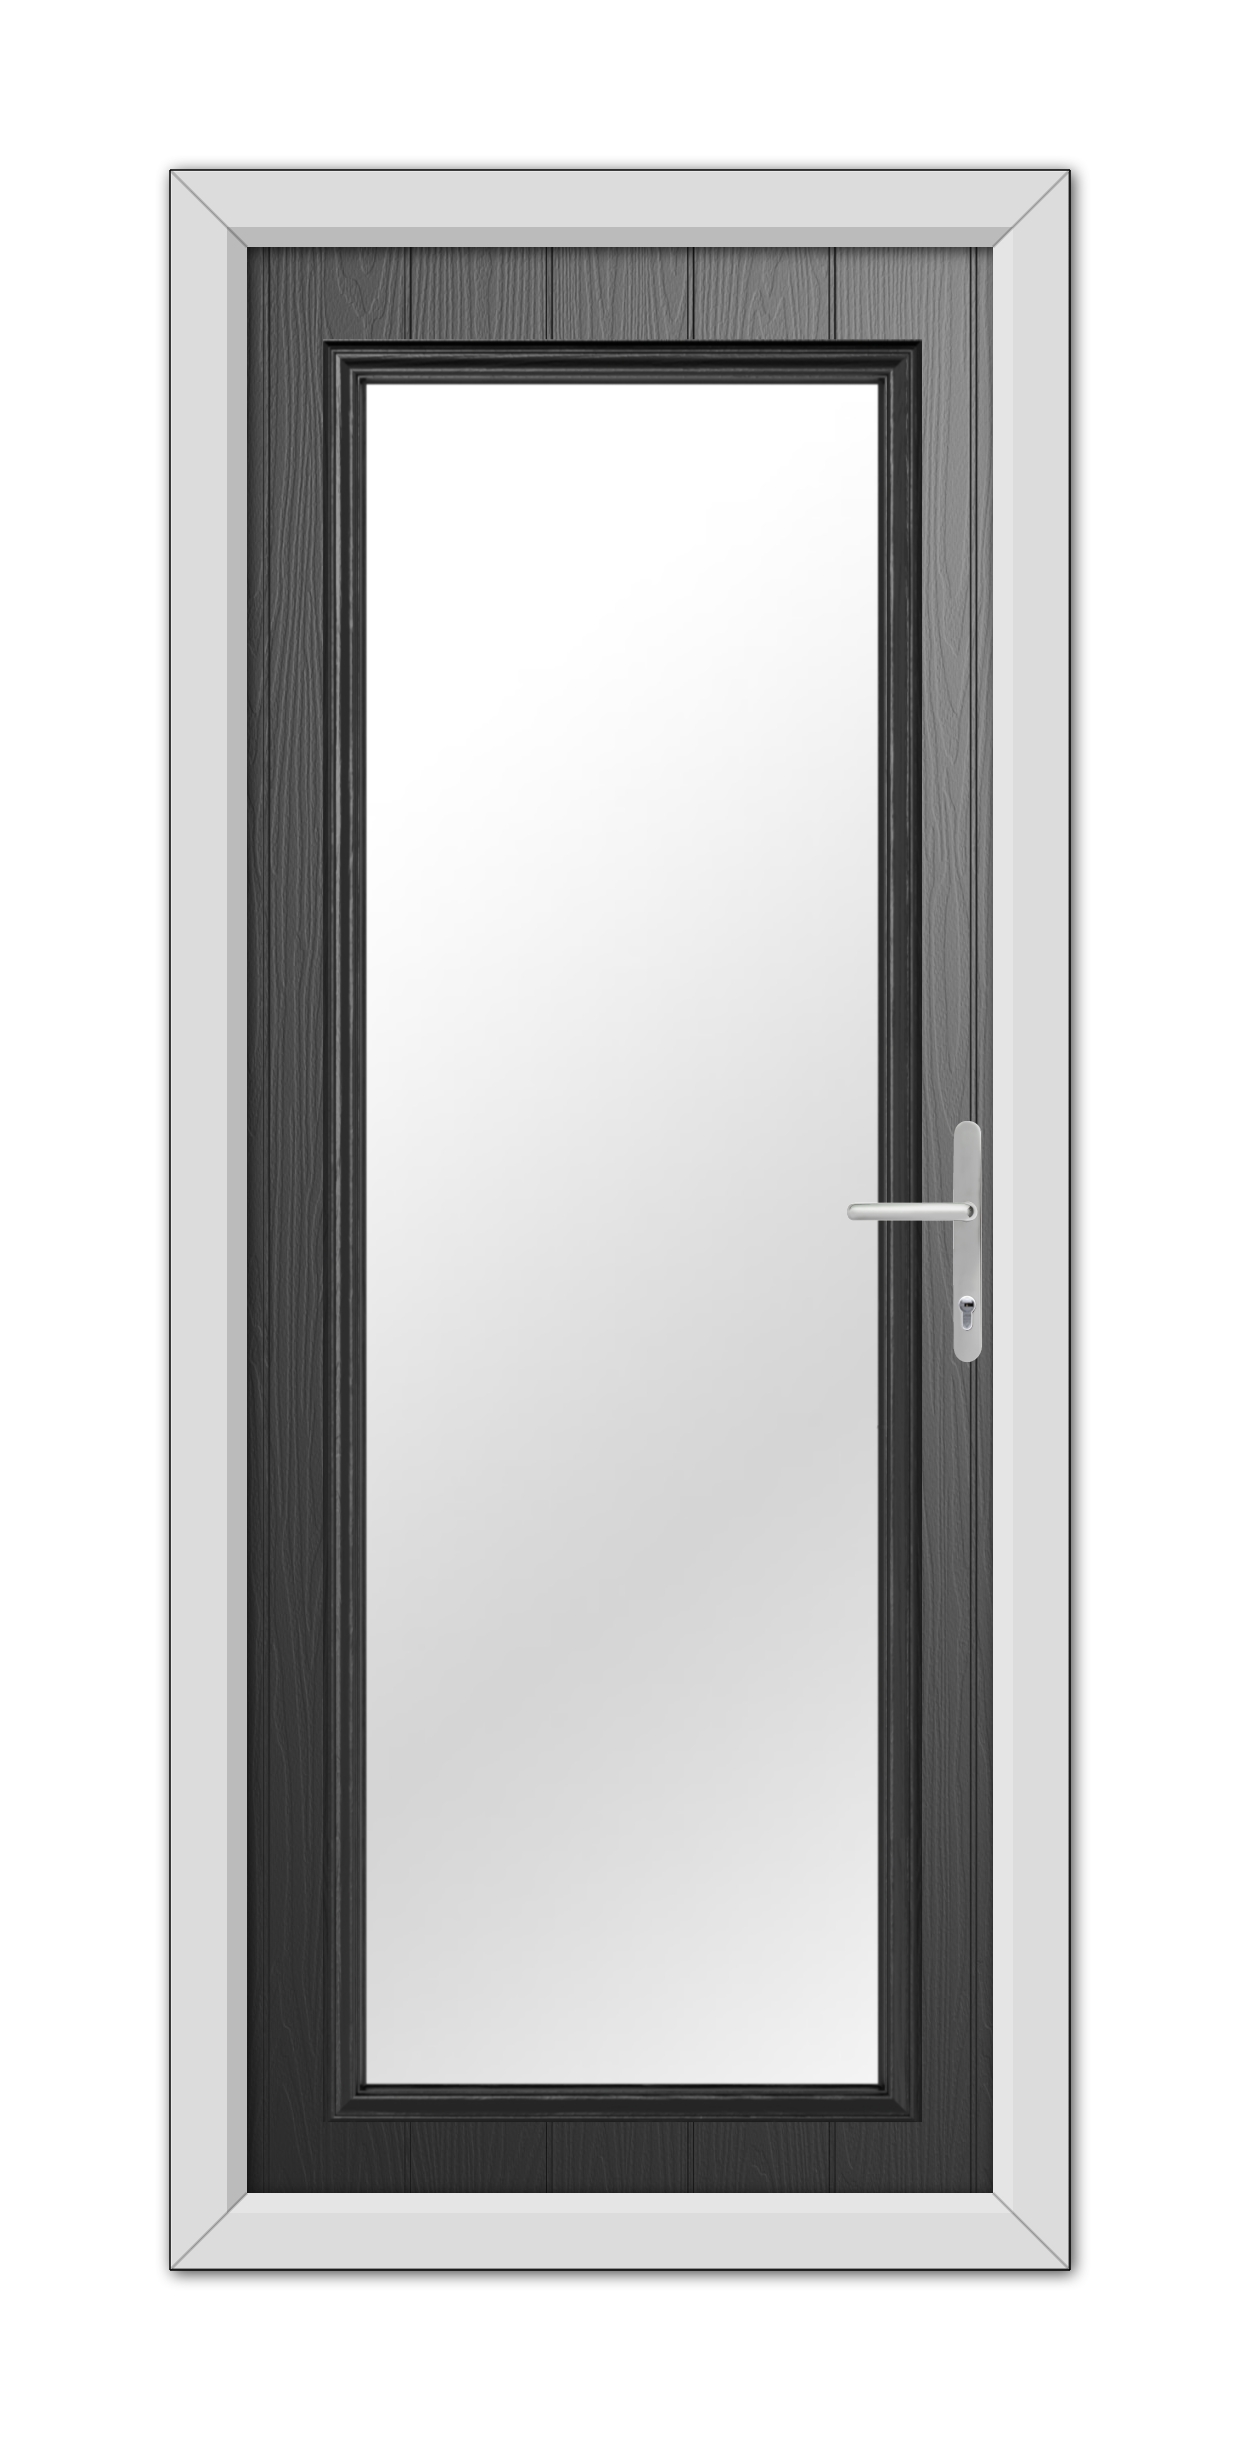 Modern black wooden door with a vertical glass panel, silver handle, and white frame, isolated on white background. - Black Hatton Composite Door 48mm Timber Core with a vertical glass panel, silver handle, and white frame, isolated on white background.